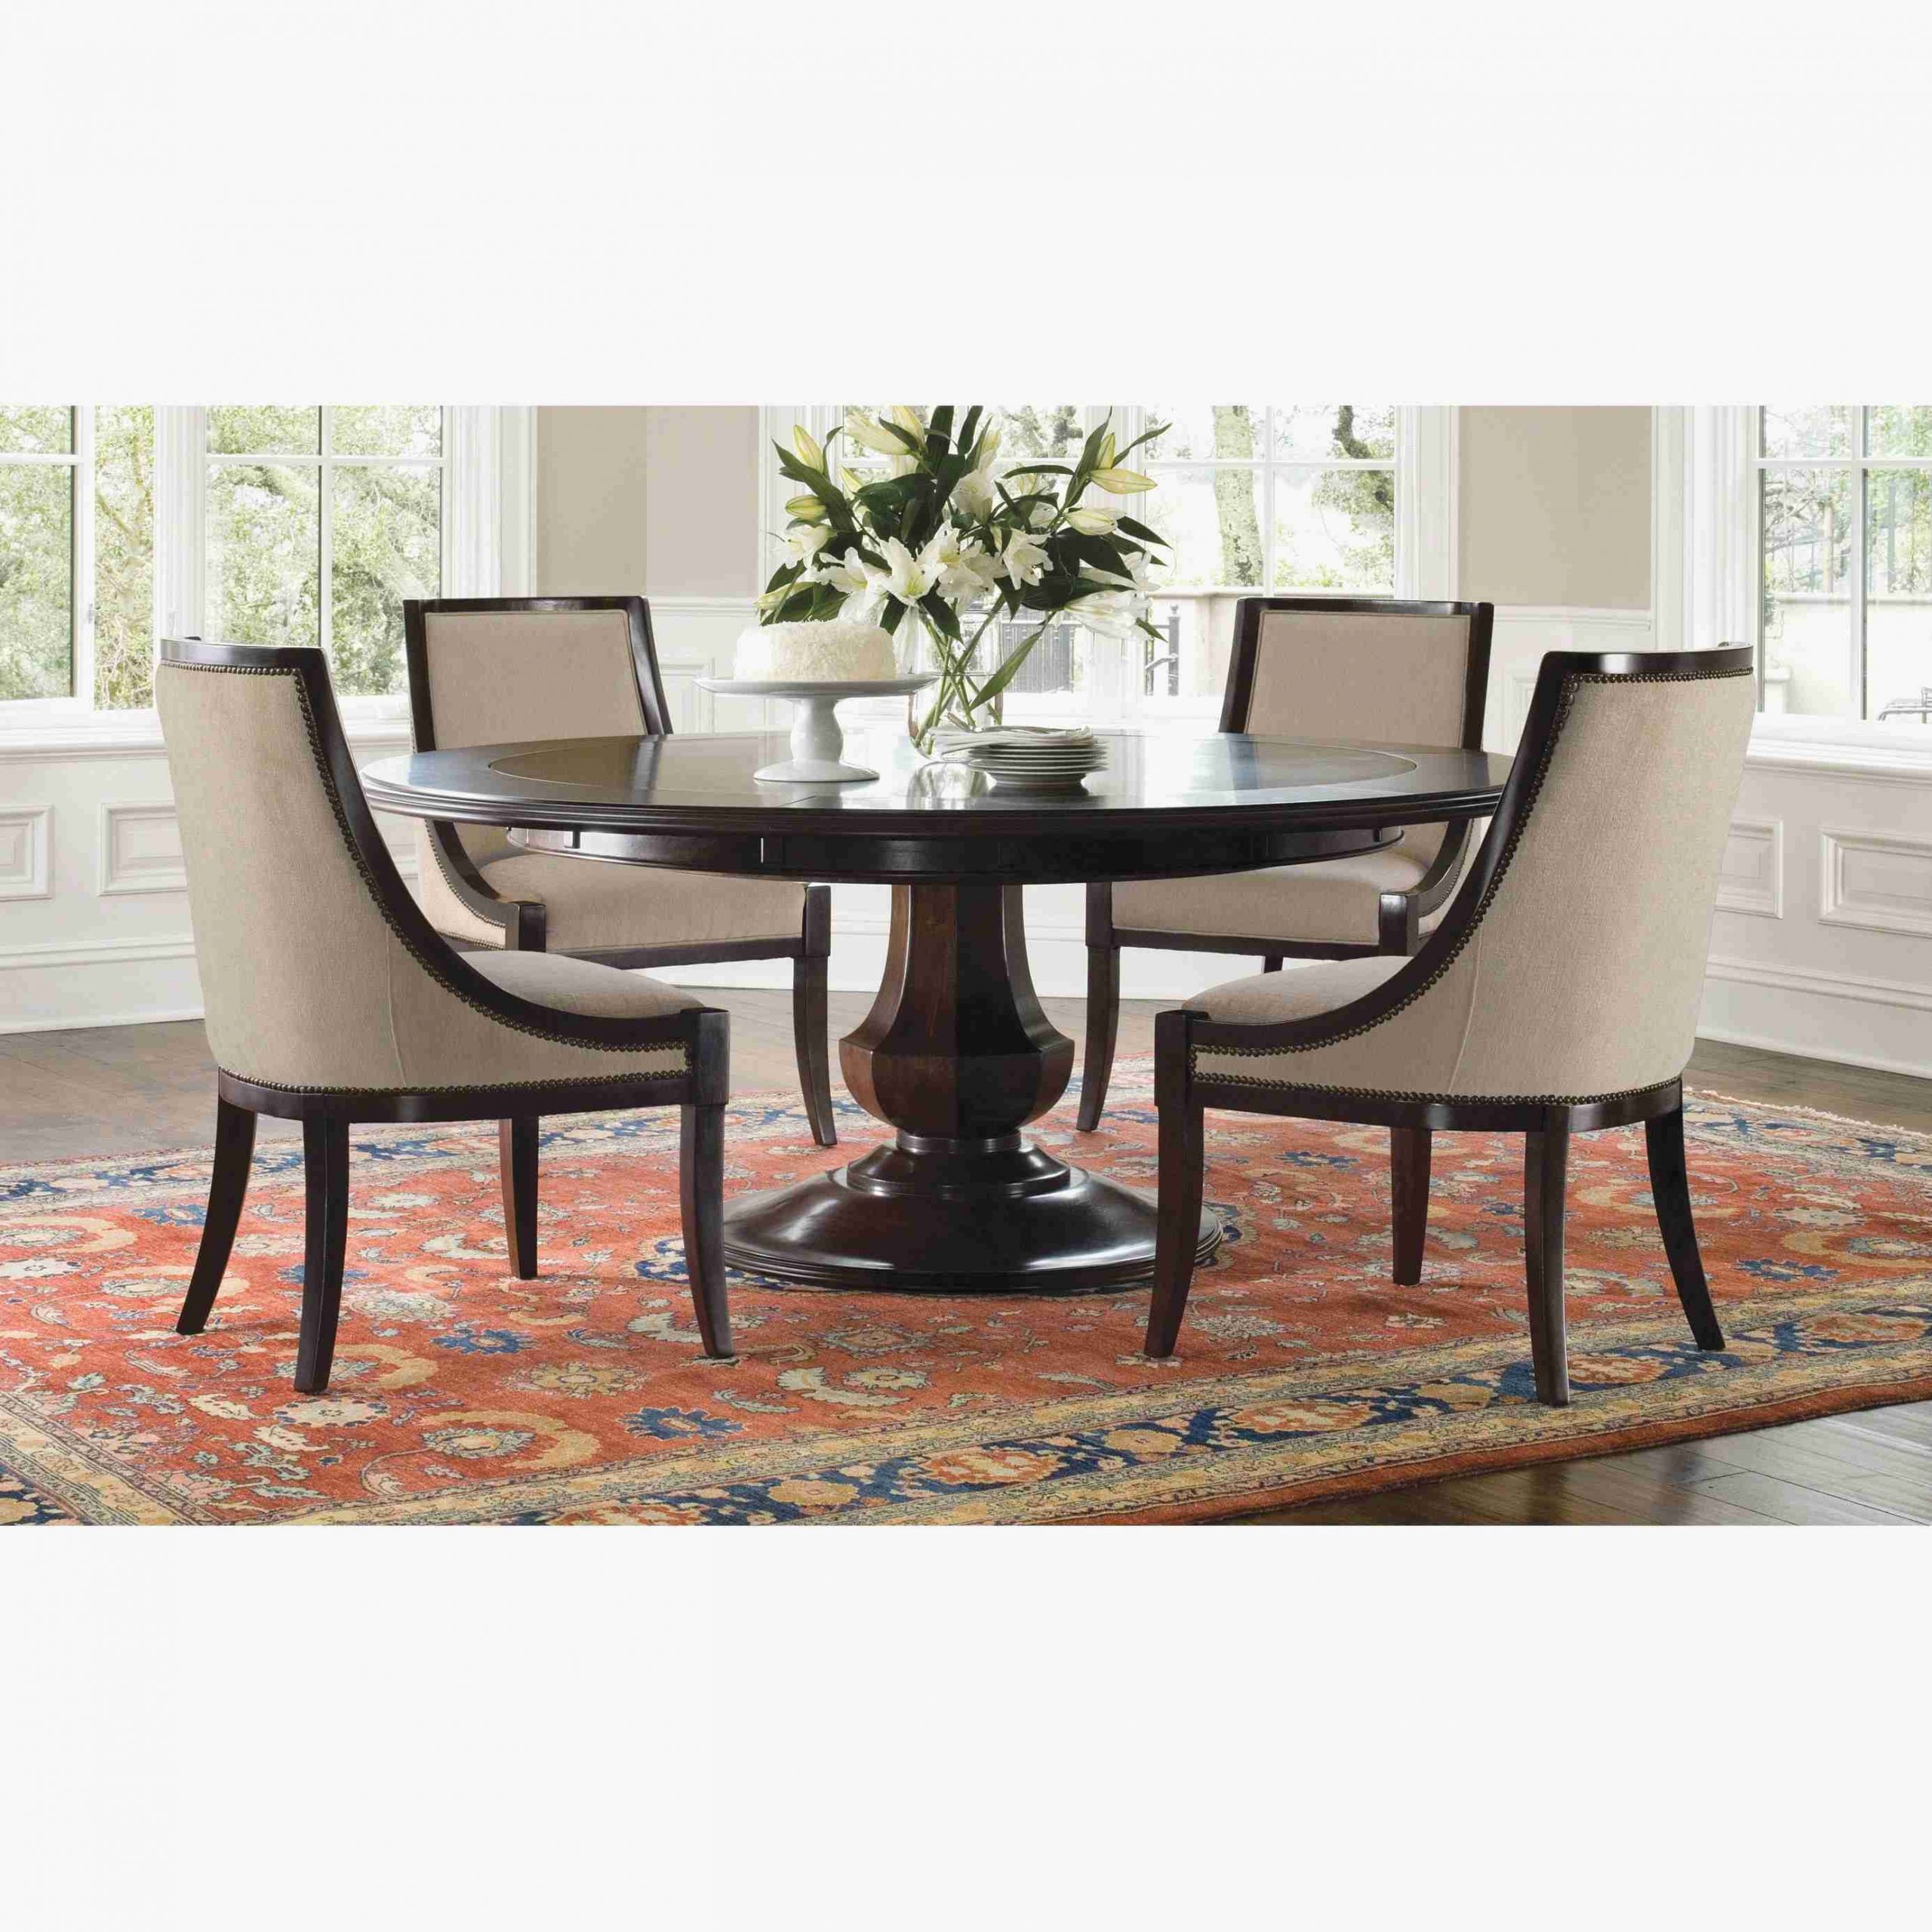 Dining Room Tables Jcpenney 2019 Home Design regarding dimensions 2772 X 2772